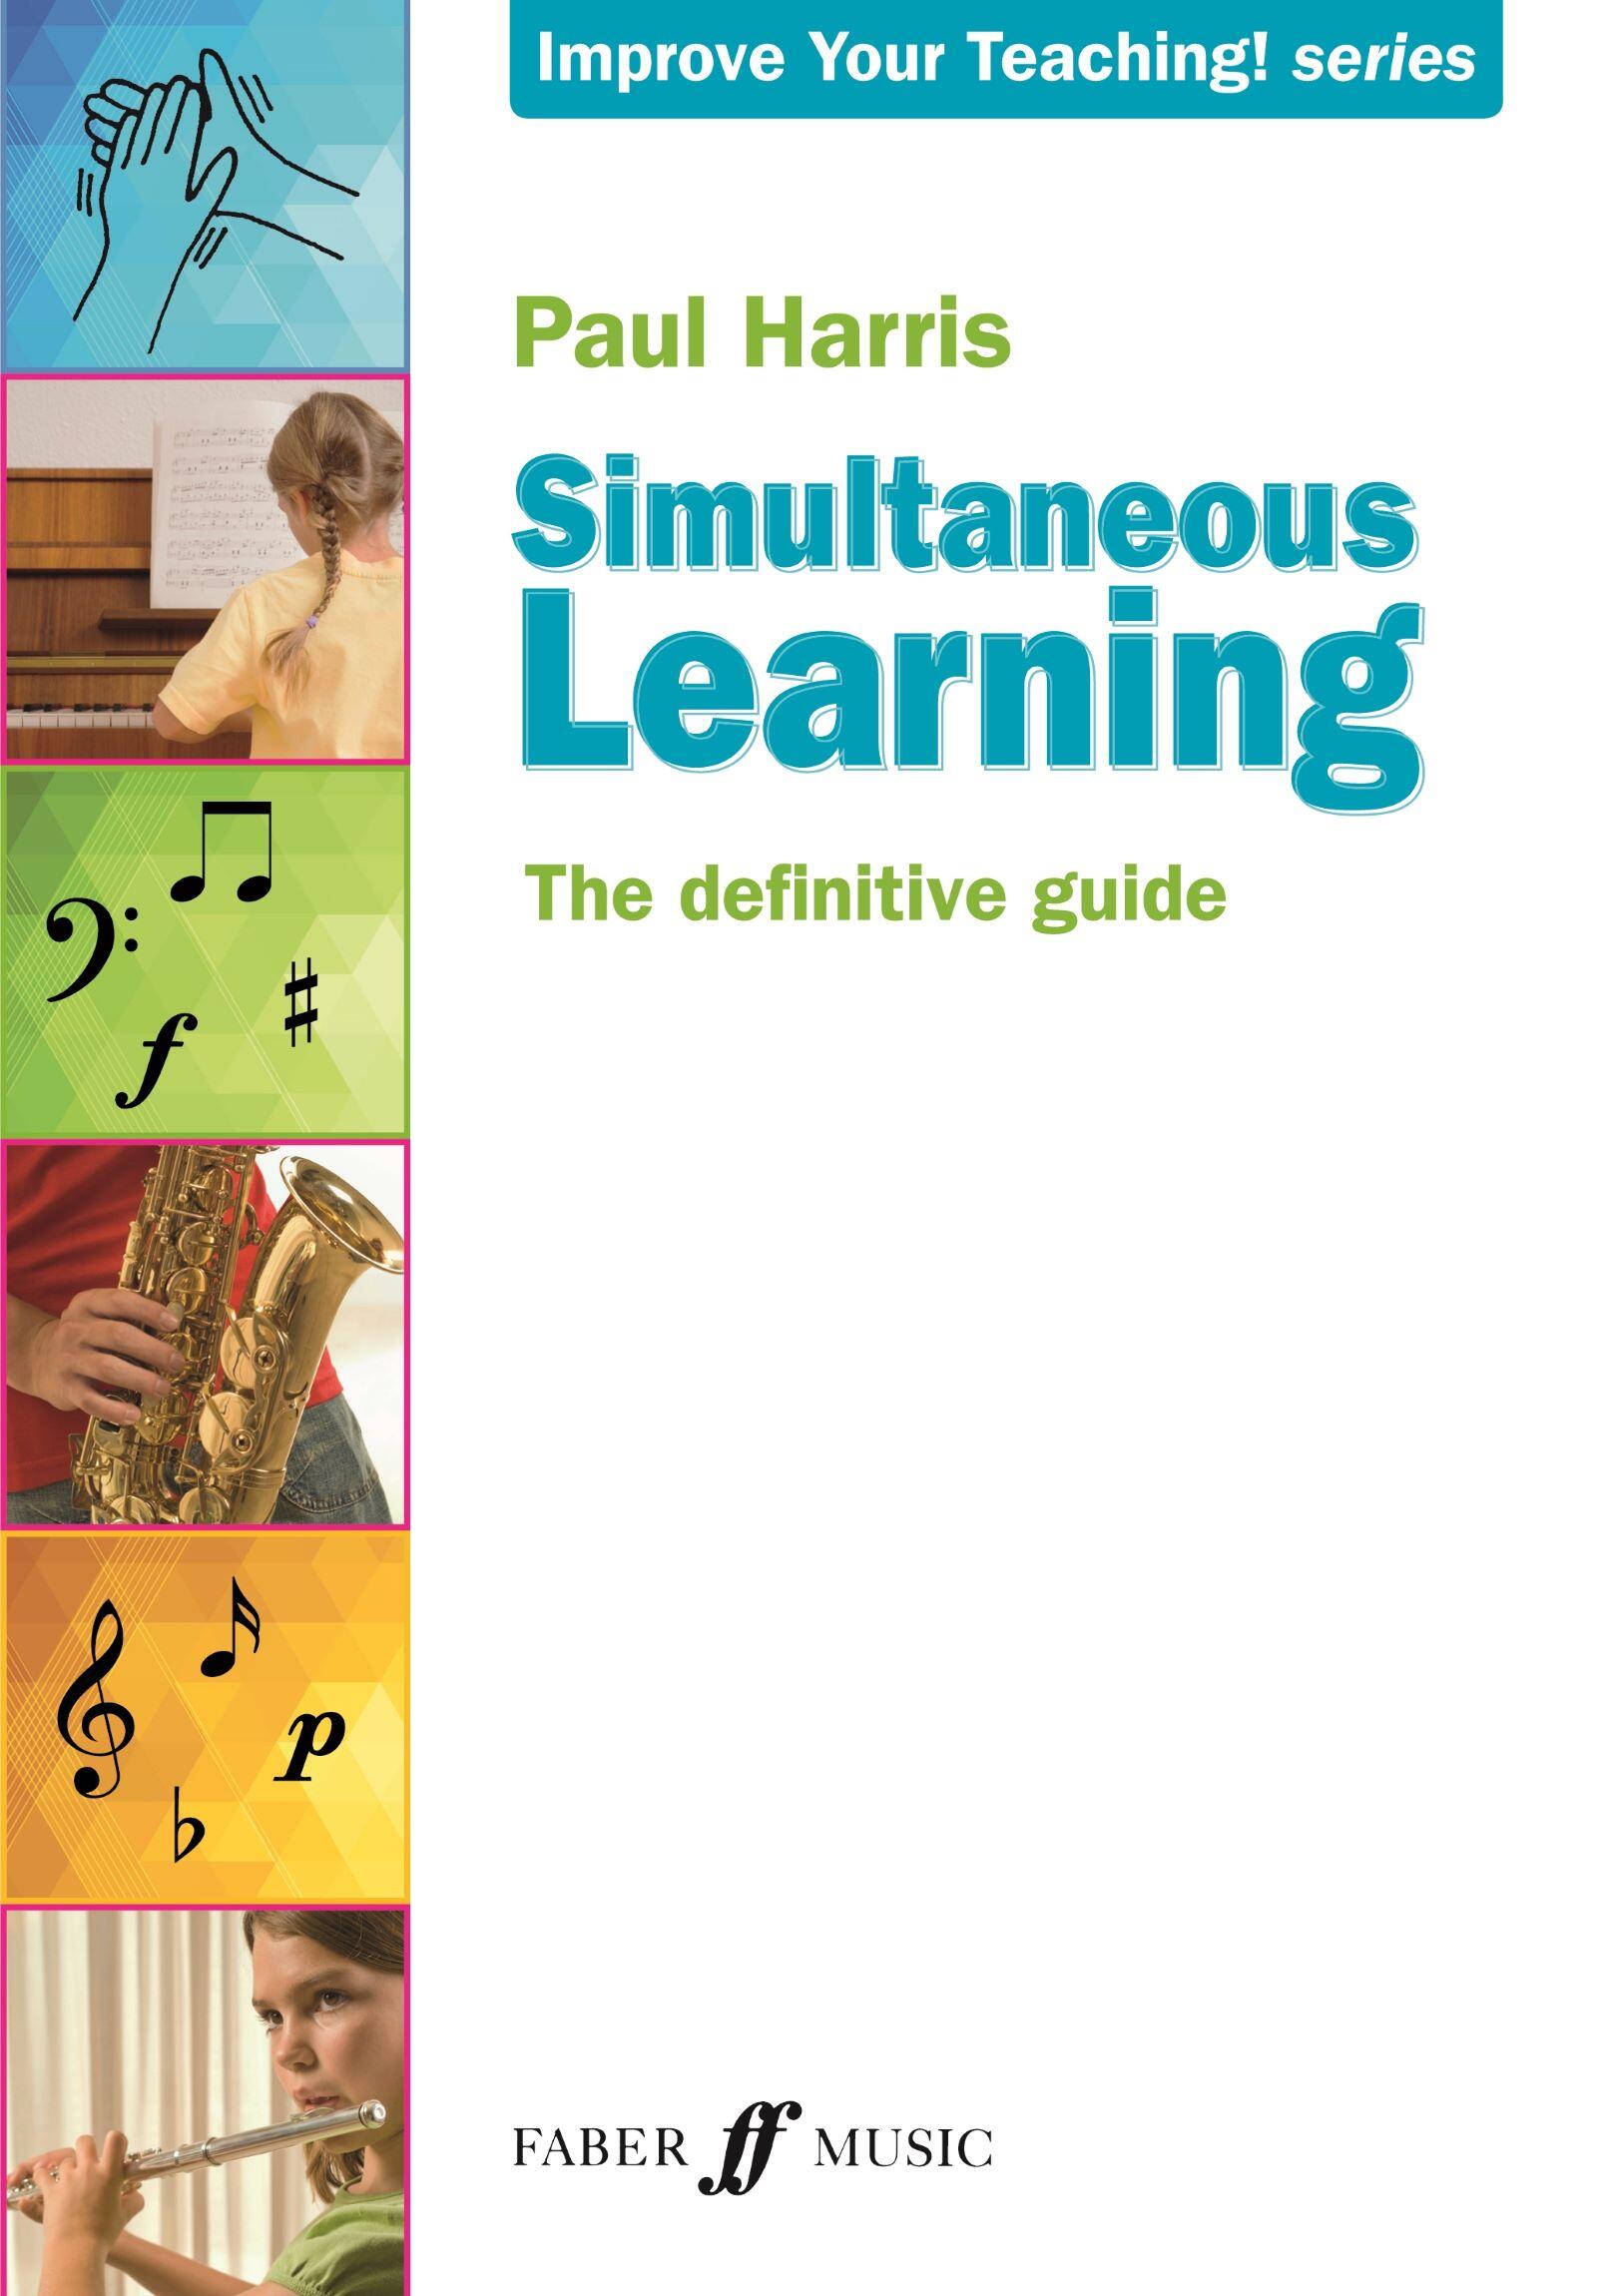 Simultaneous Learning The definitive guide : photo 1